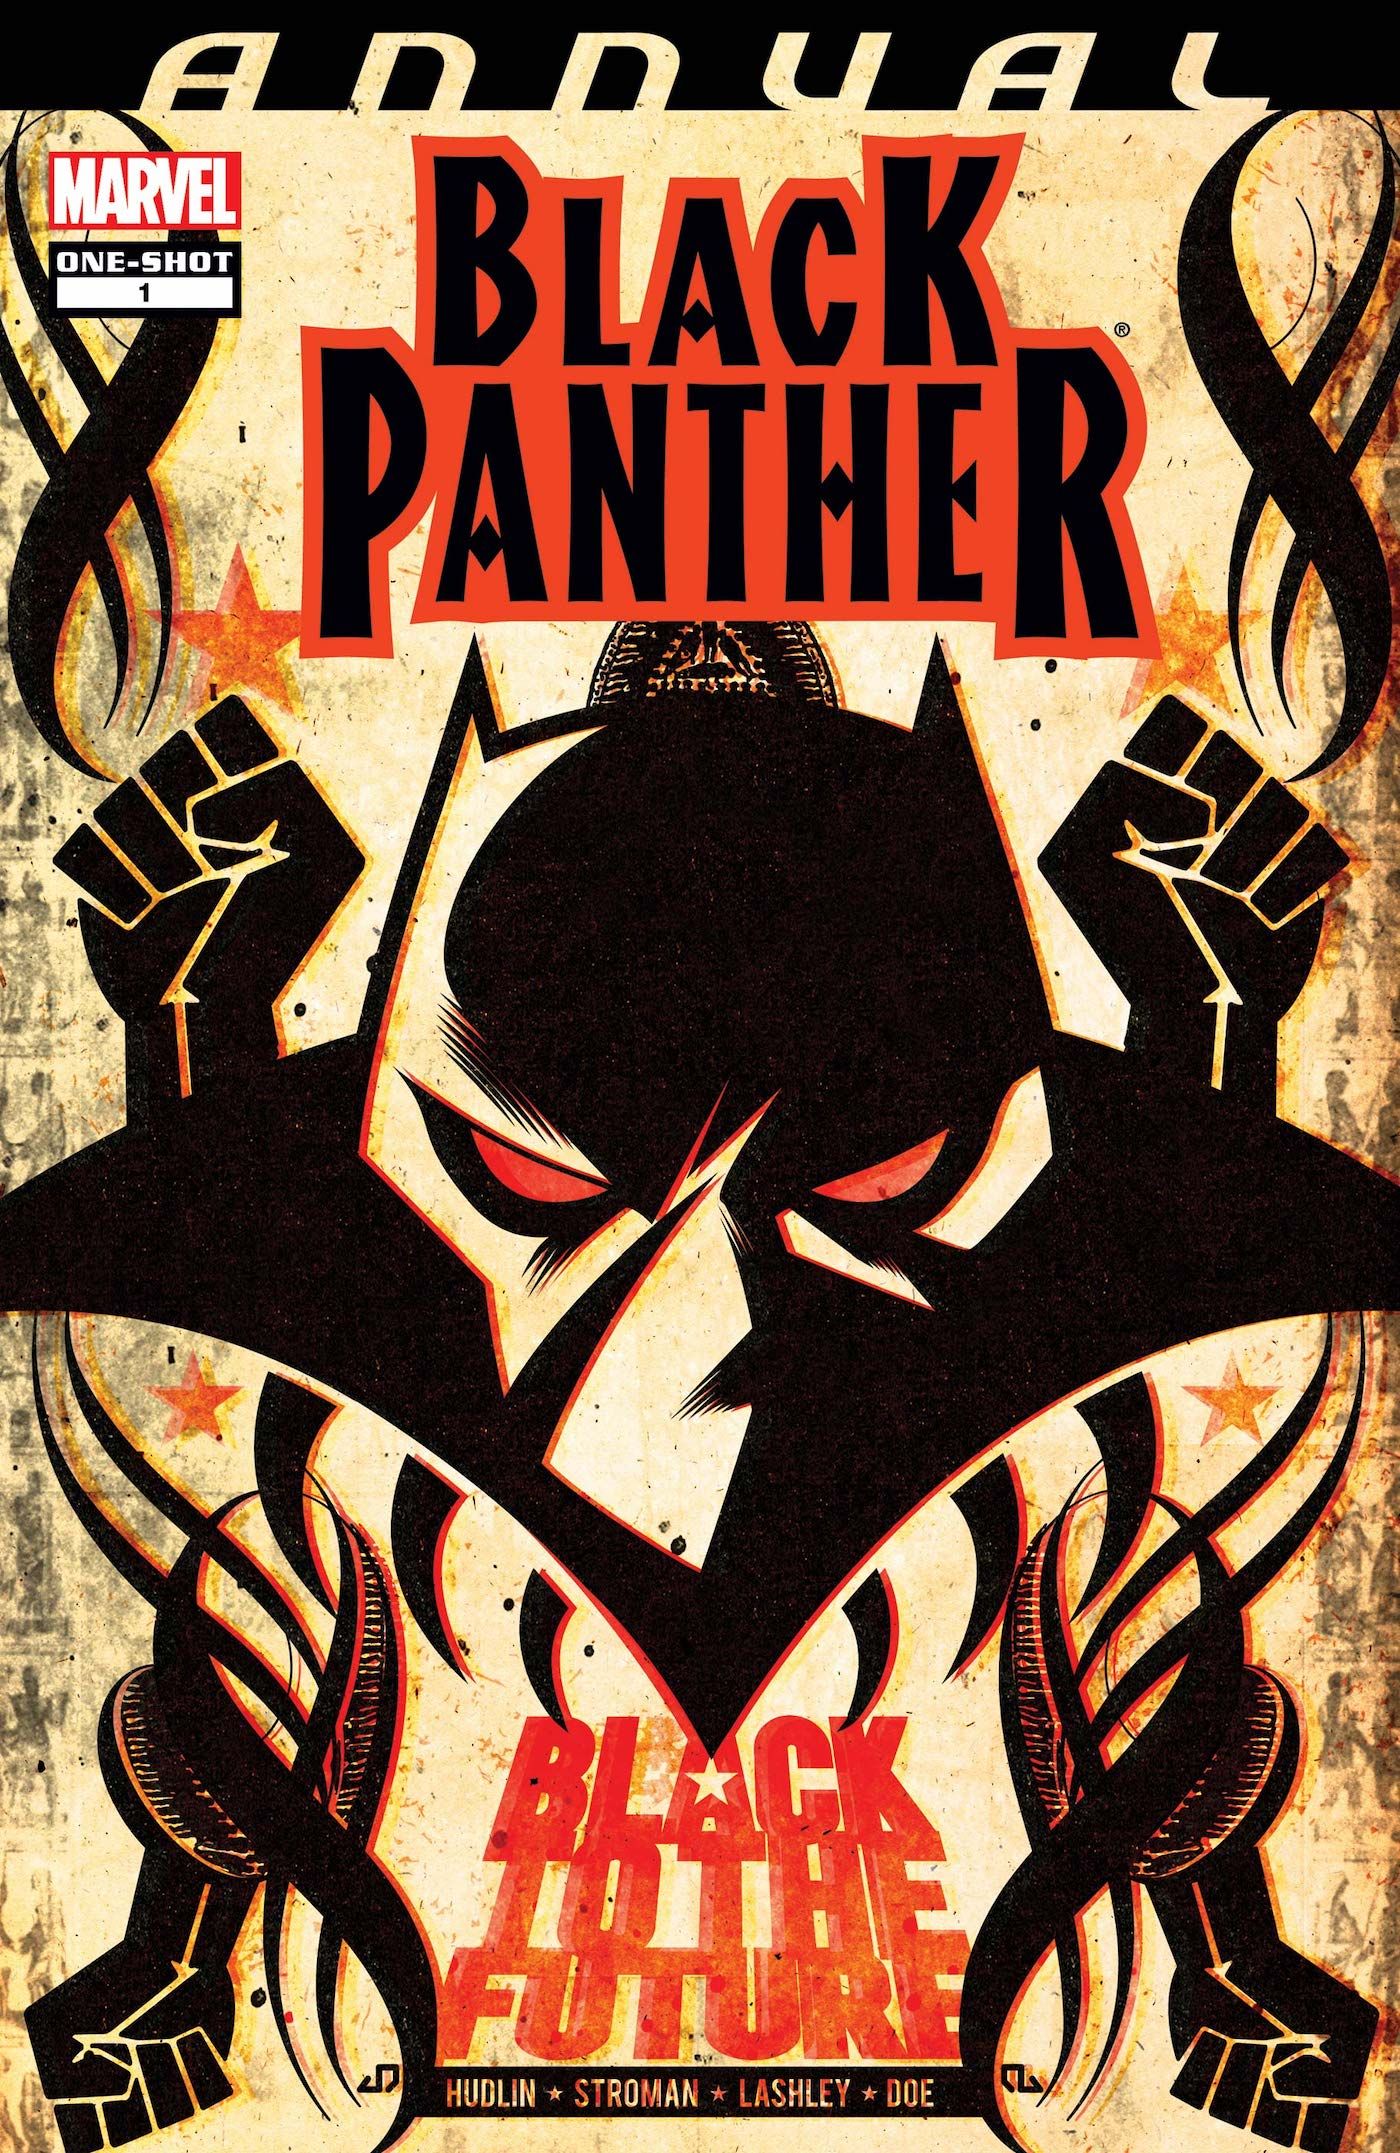 3. Black Panther Black to the Future Annual 2008